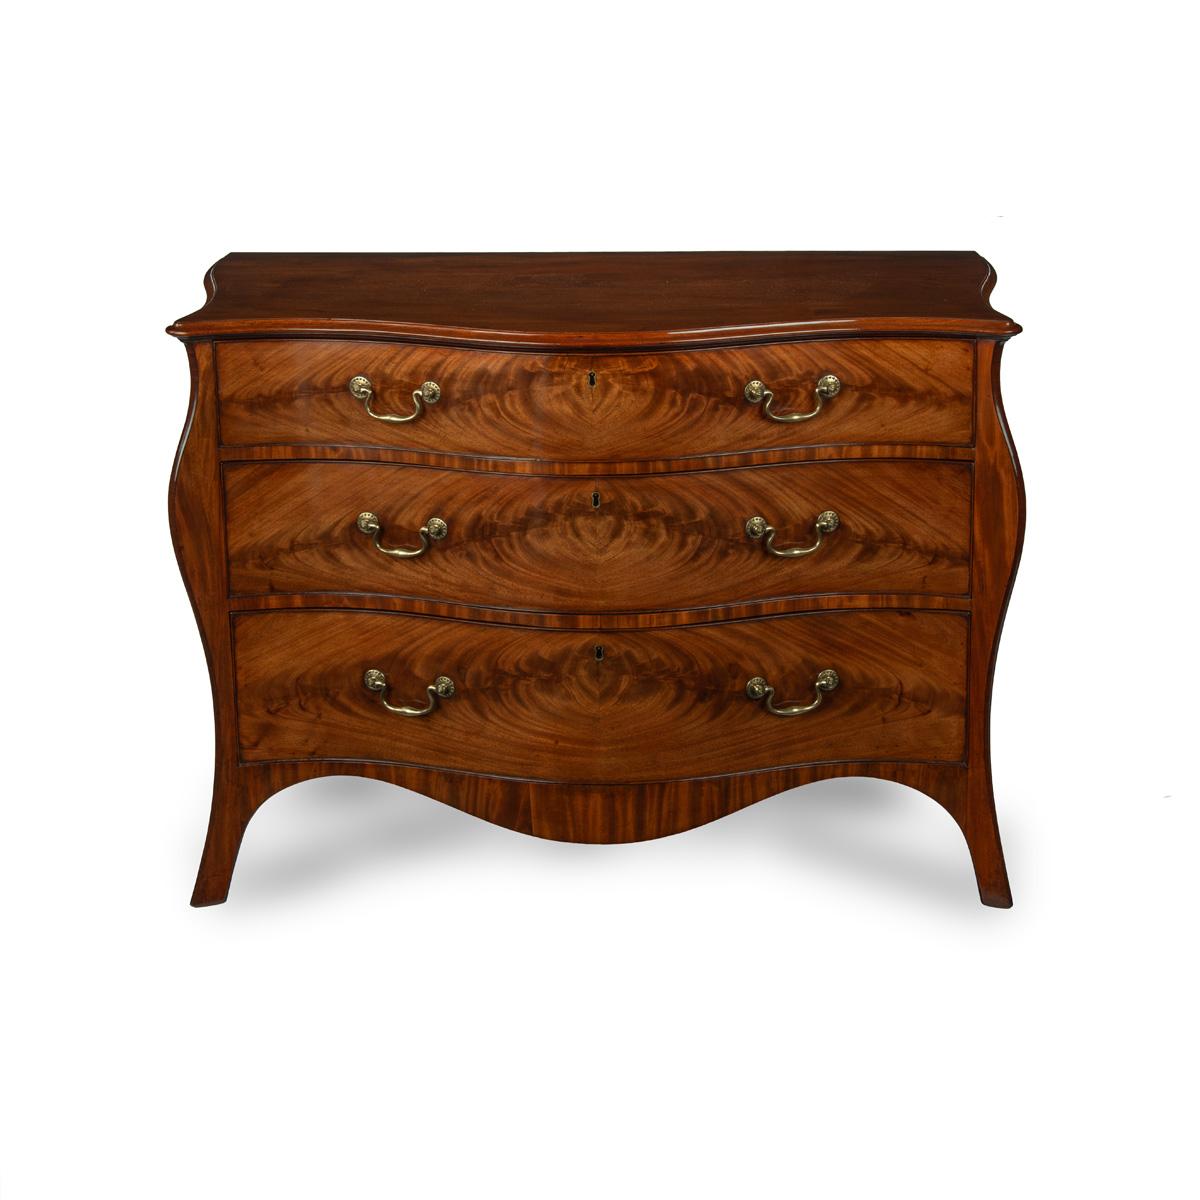 A mahogany three-drawer serpentine chest of drawers, attributed to Henry Hill, with three graduated drawers, originally with a fitted top drawer, now retaining the slide, decorated with flame book matched veneers.  English, circa 1770.

Published: